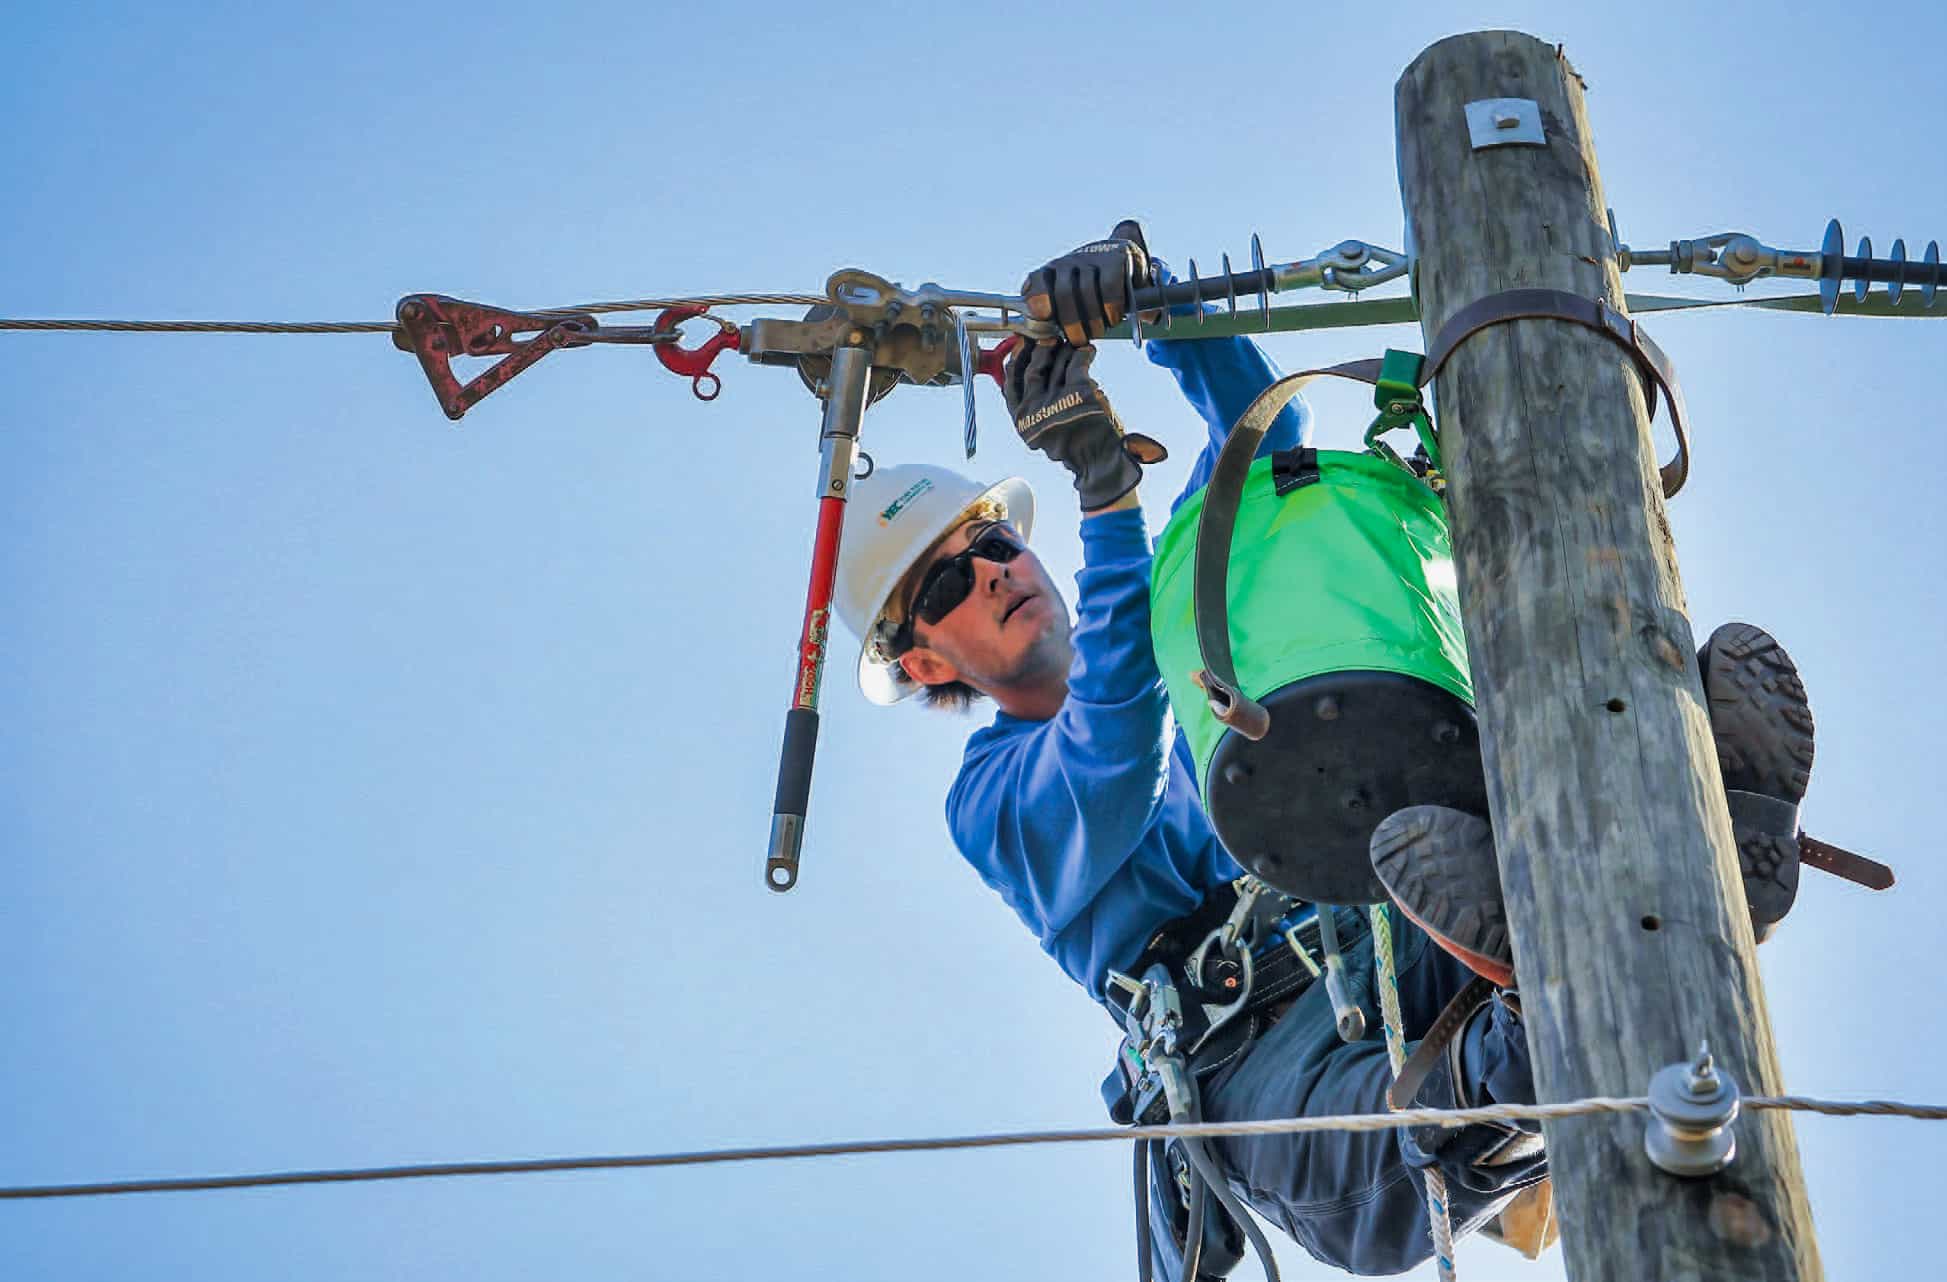 Lineworker, Jackson Good, outfitted in safety gear at the top of an electric utility pole